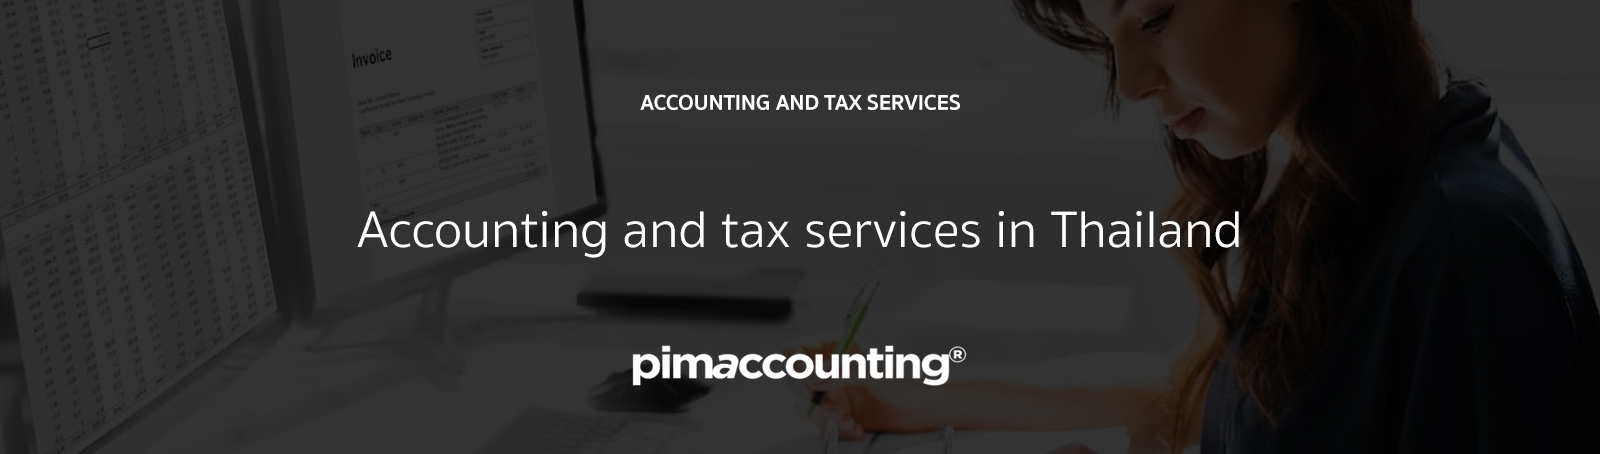 Accounting and tax services in Thailand